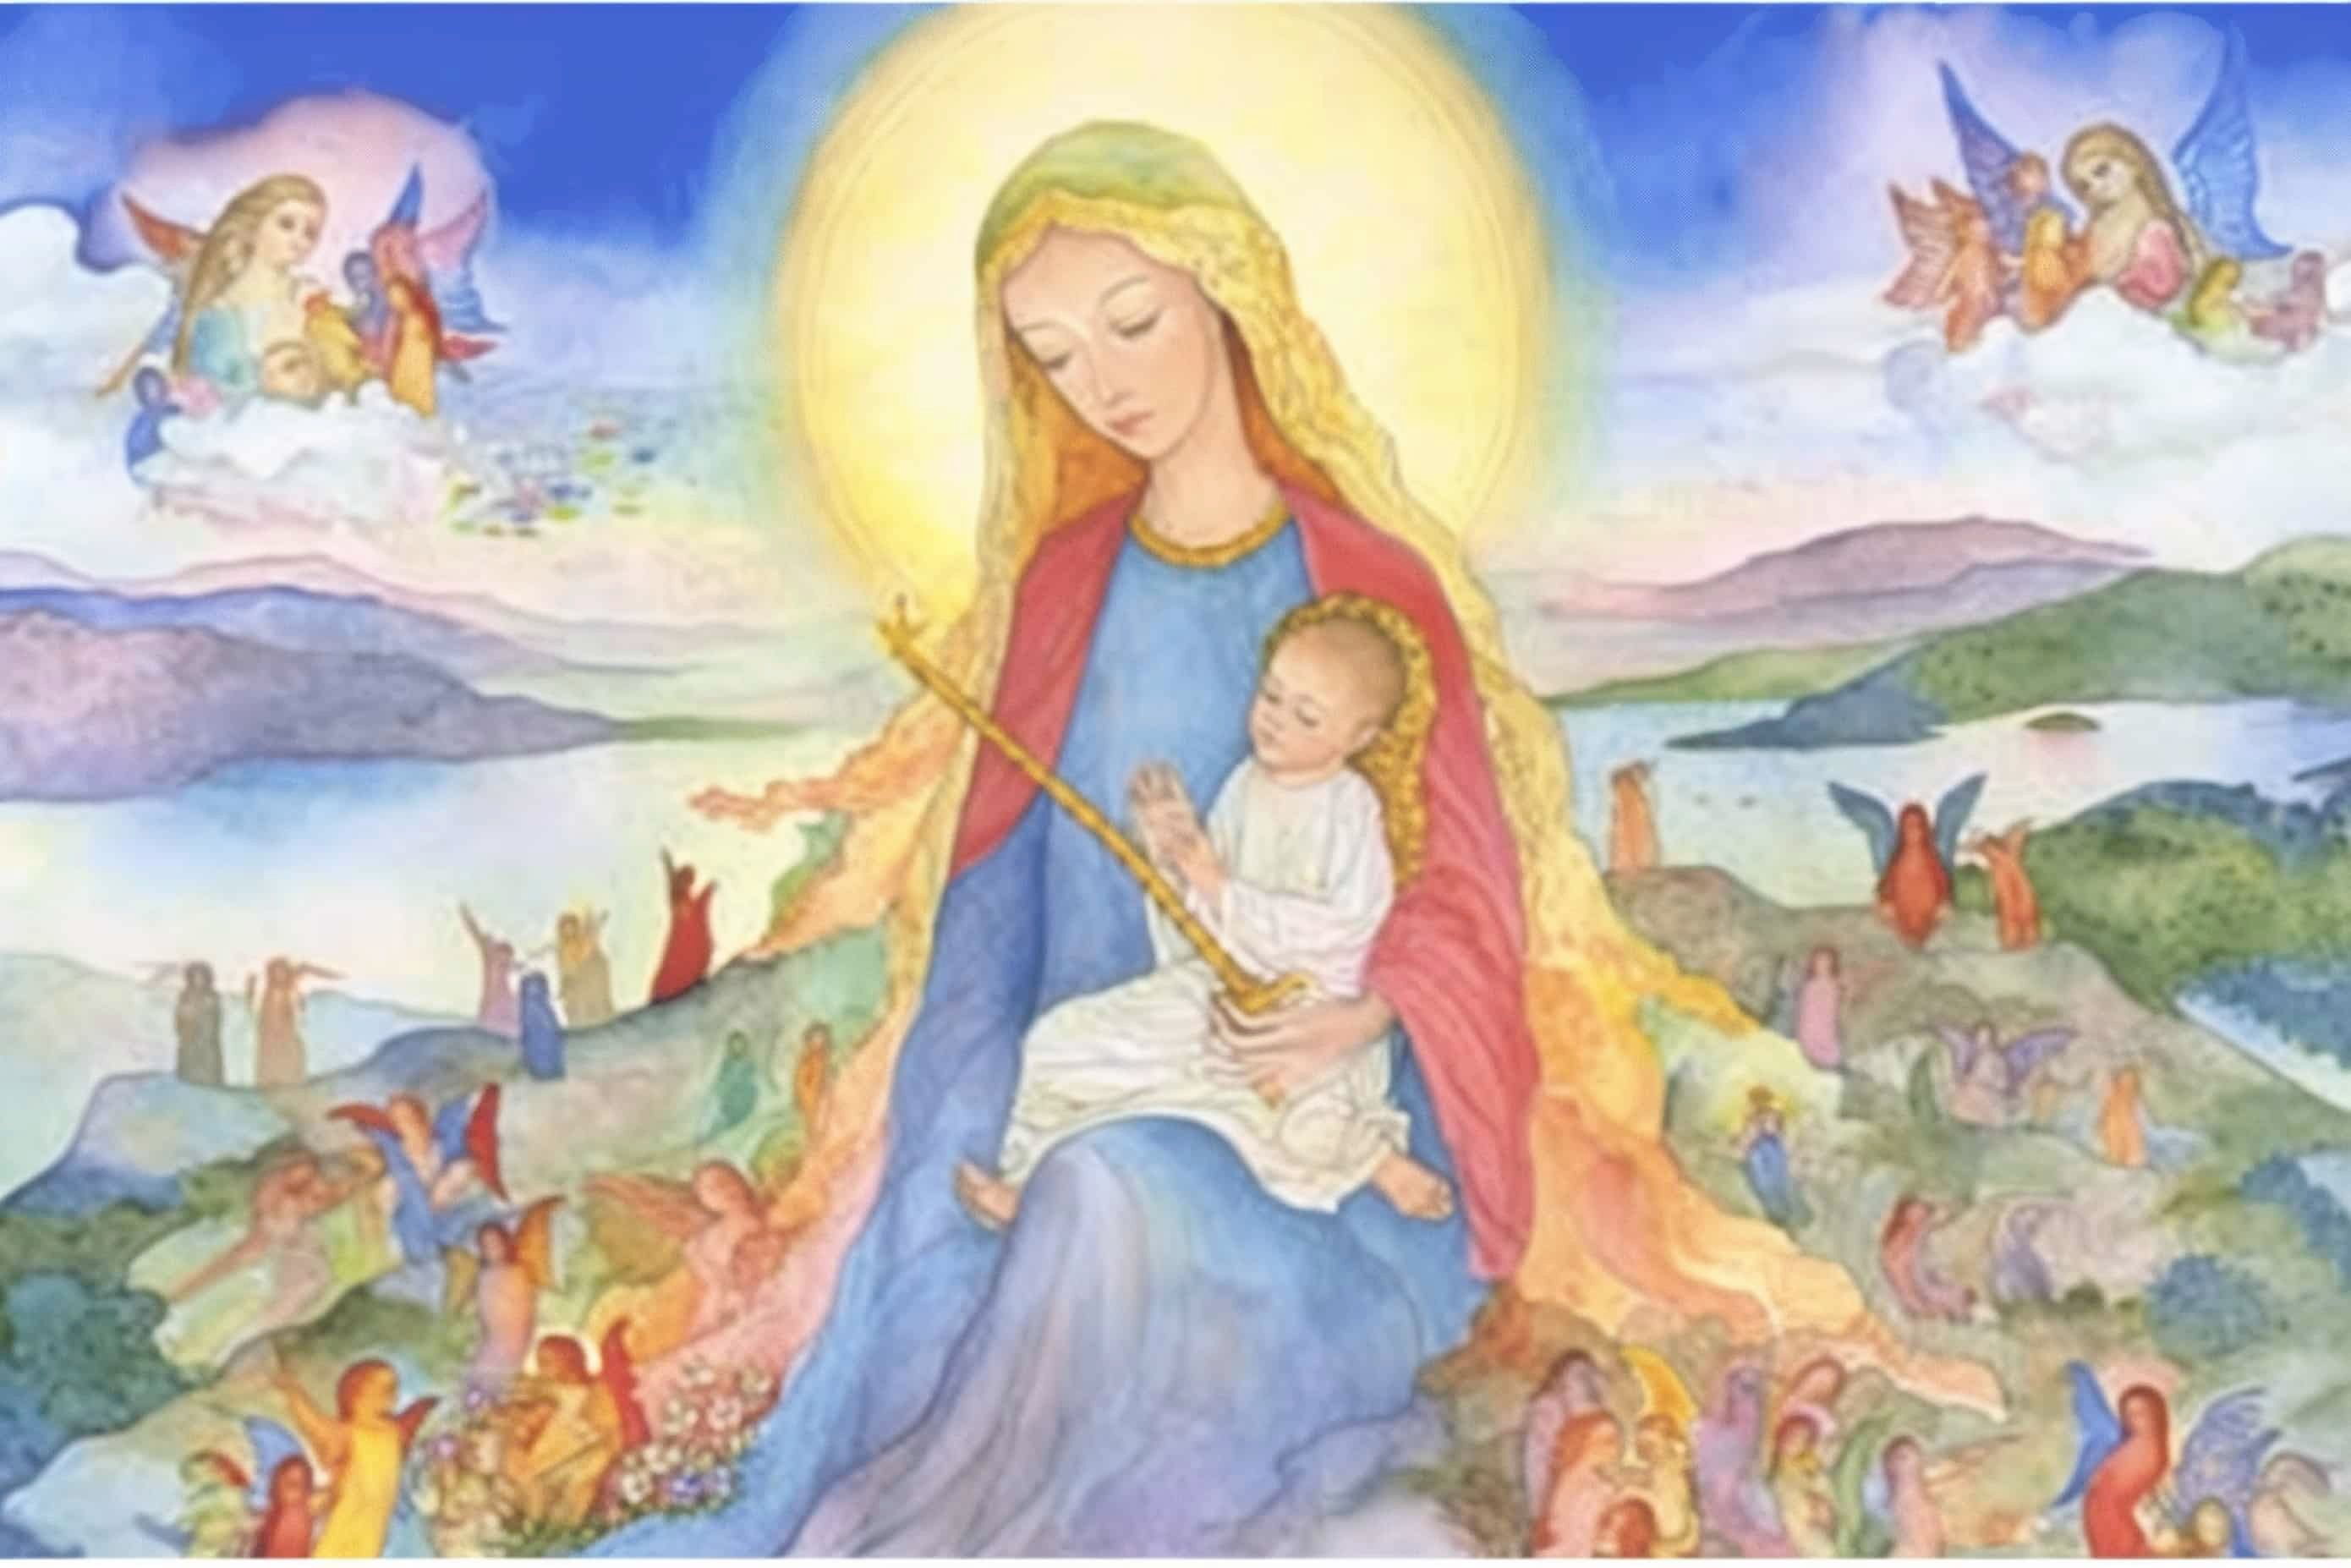 Our Lady of Peace image